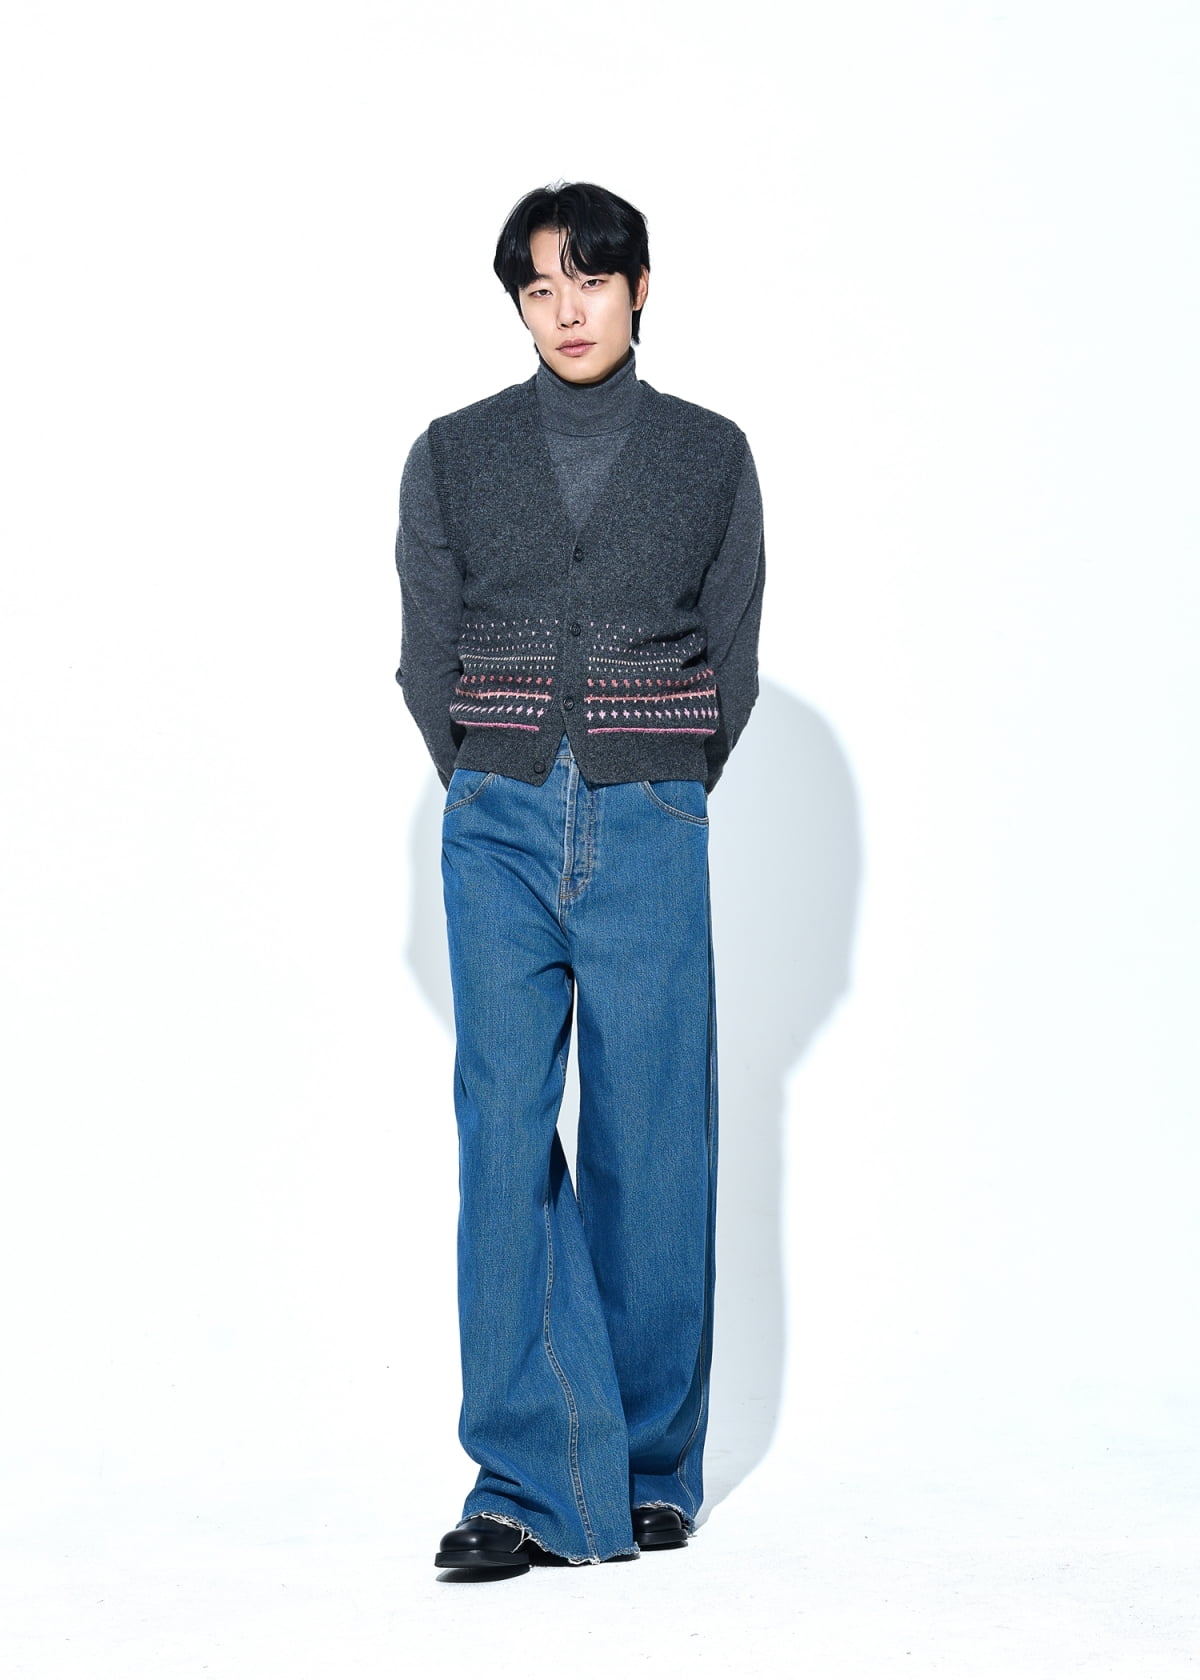 Ryu Jun-yeol, "It's already the 10th anniversary of 'Reply'? I wish I could meet my friends in good health every year."